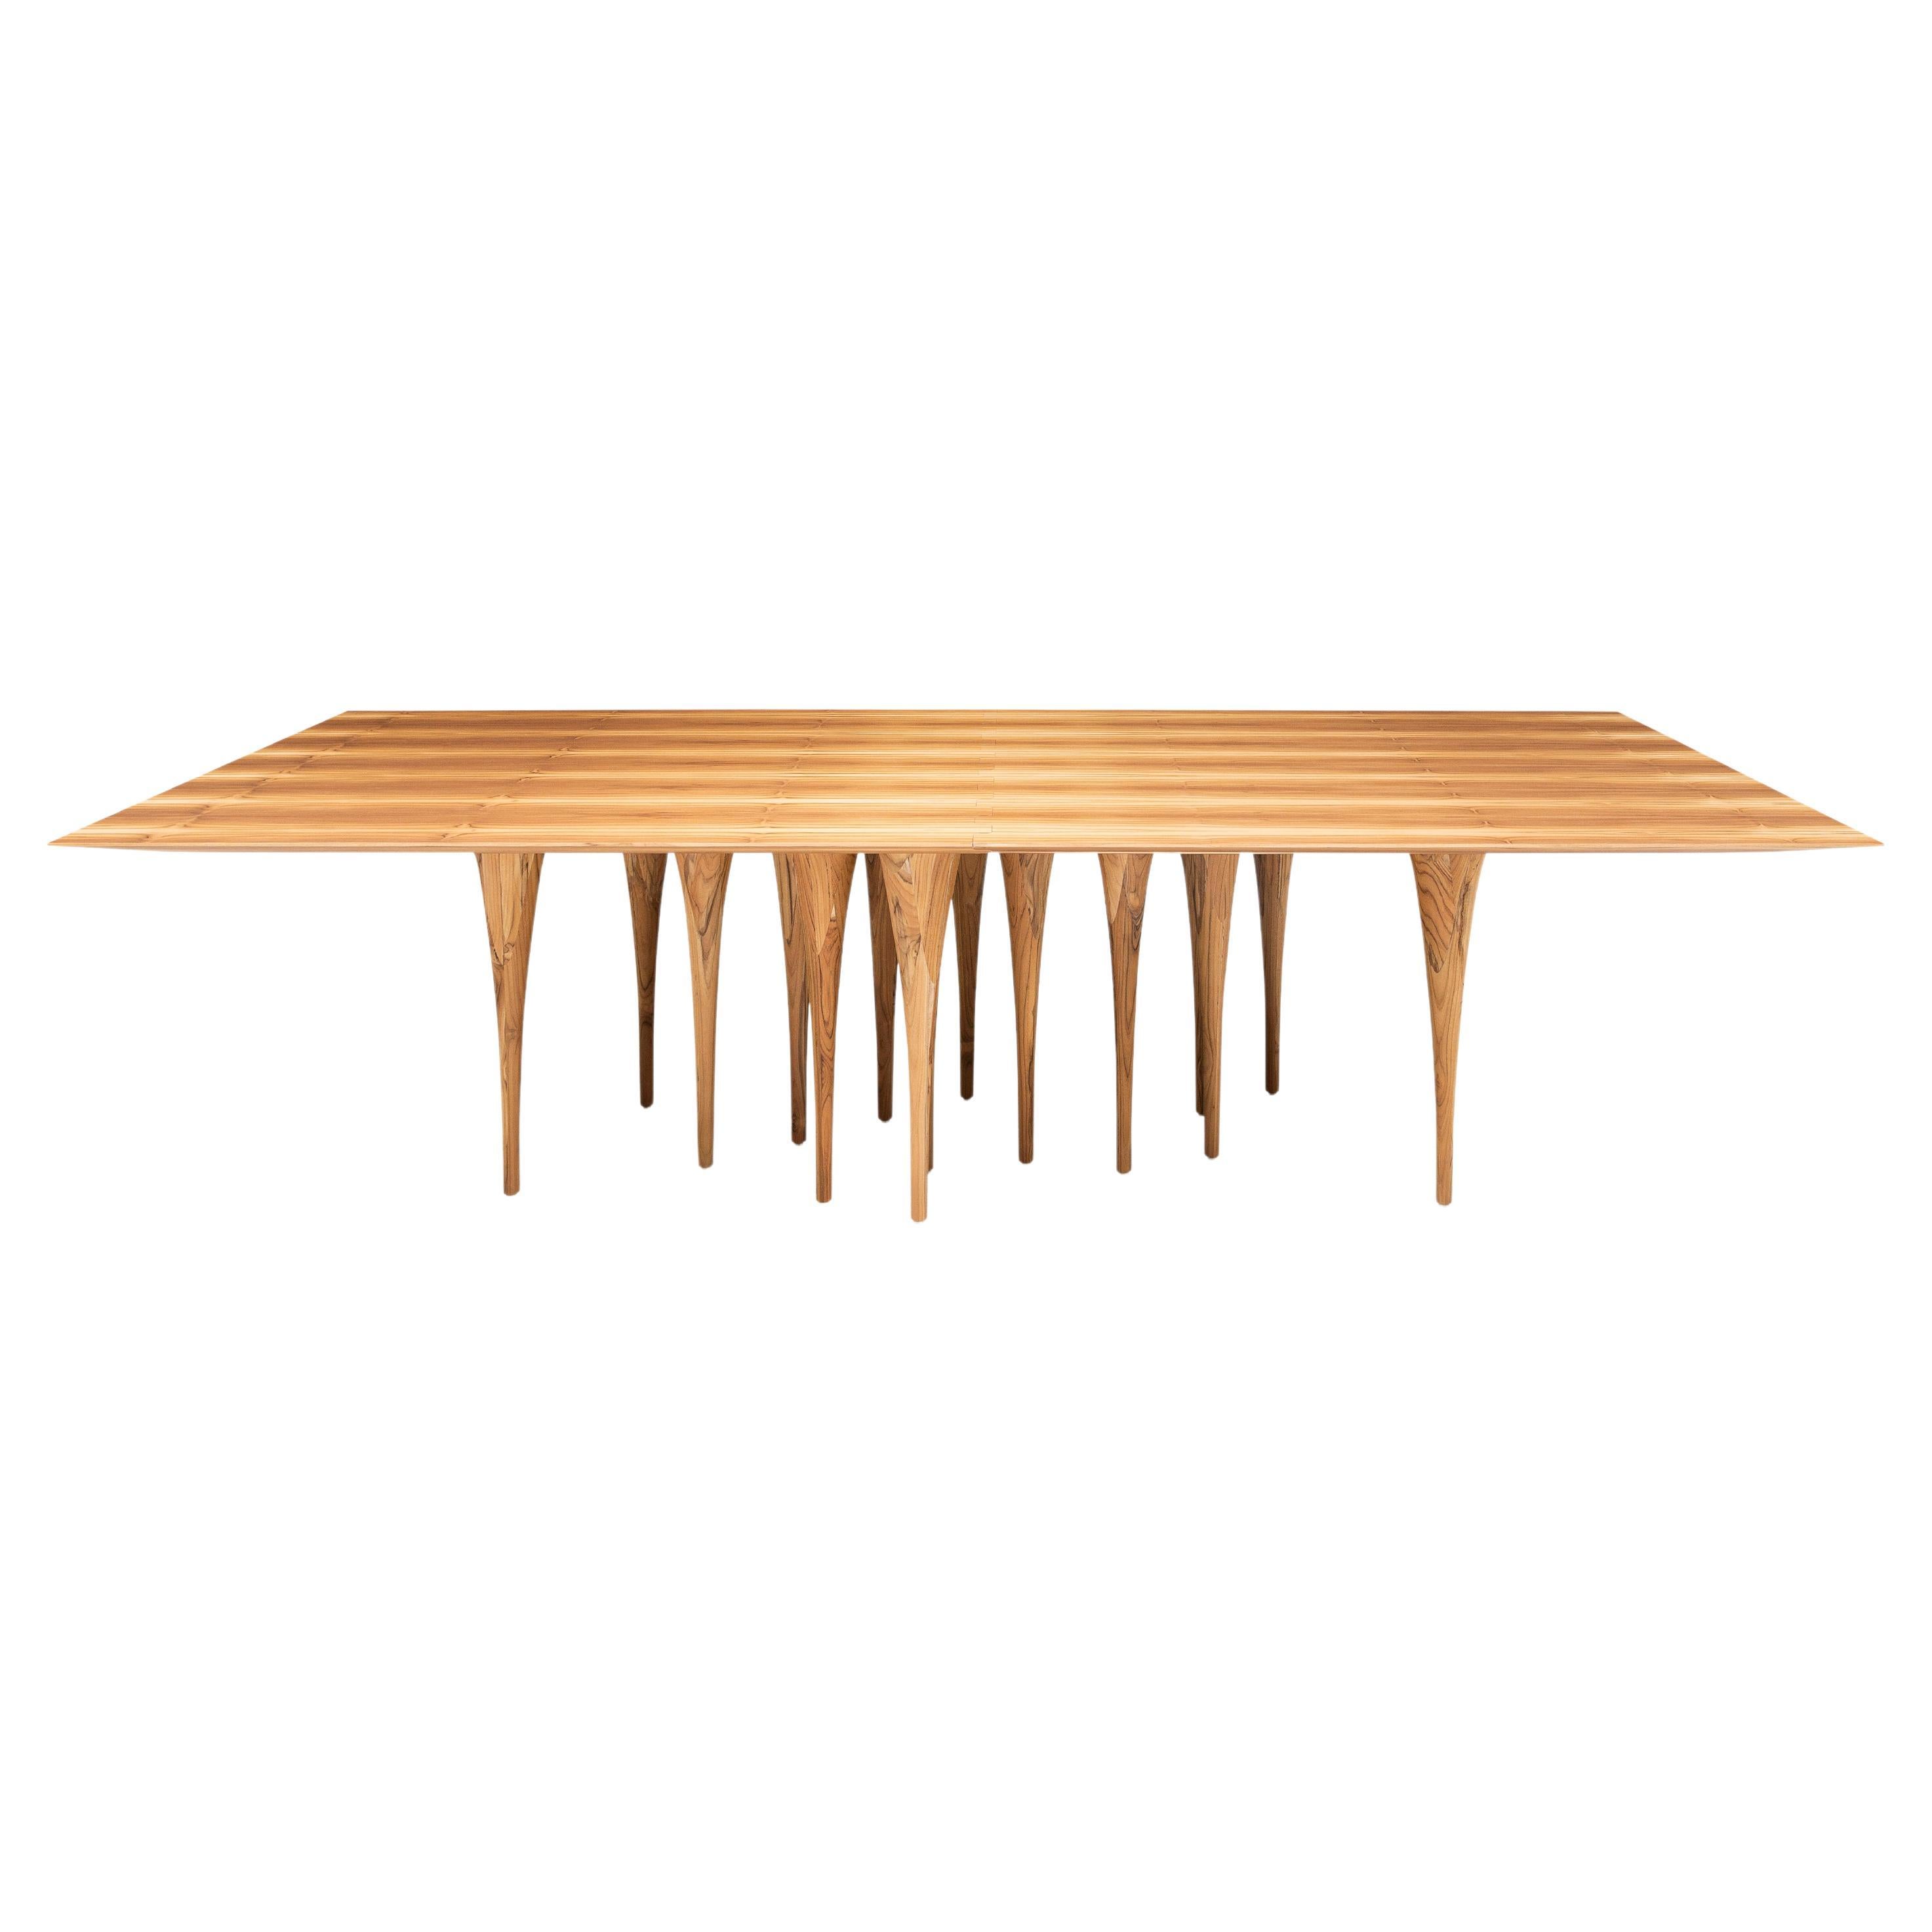 The Uultis team has created this rectangular Pin table in a teak wood finish with twelve legs causing a surprising impact at first sight. It has a very singular and original structure resembling the corridors of gothic castles, but at the same time,